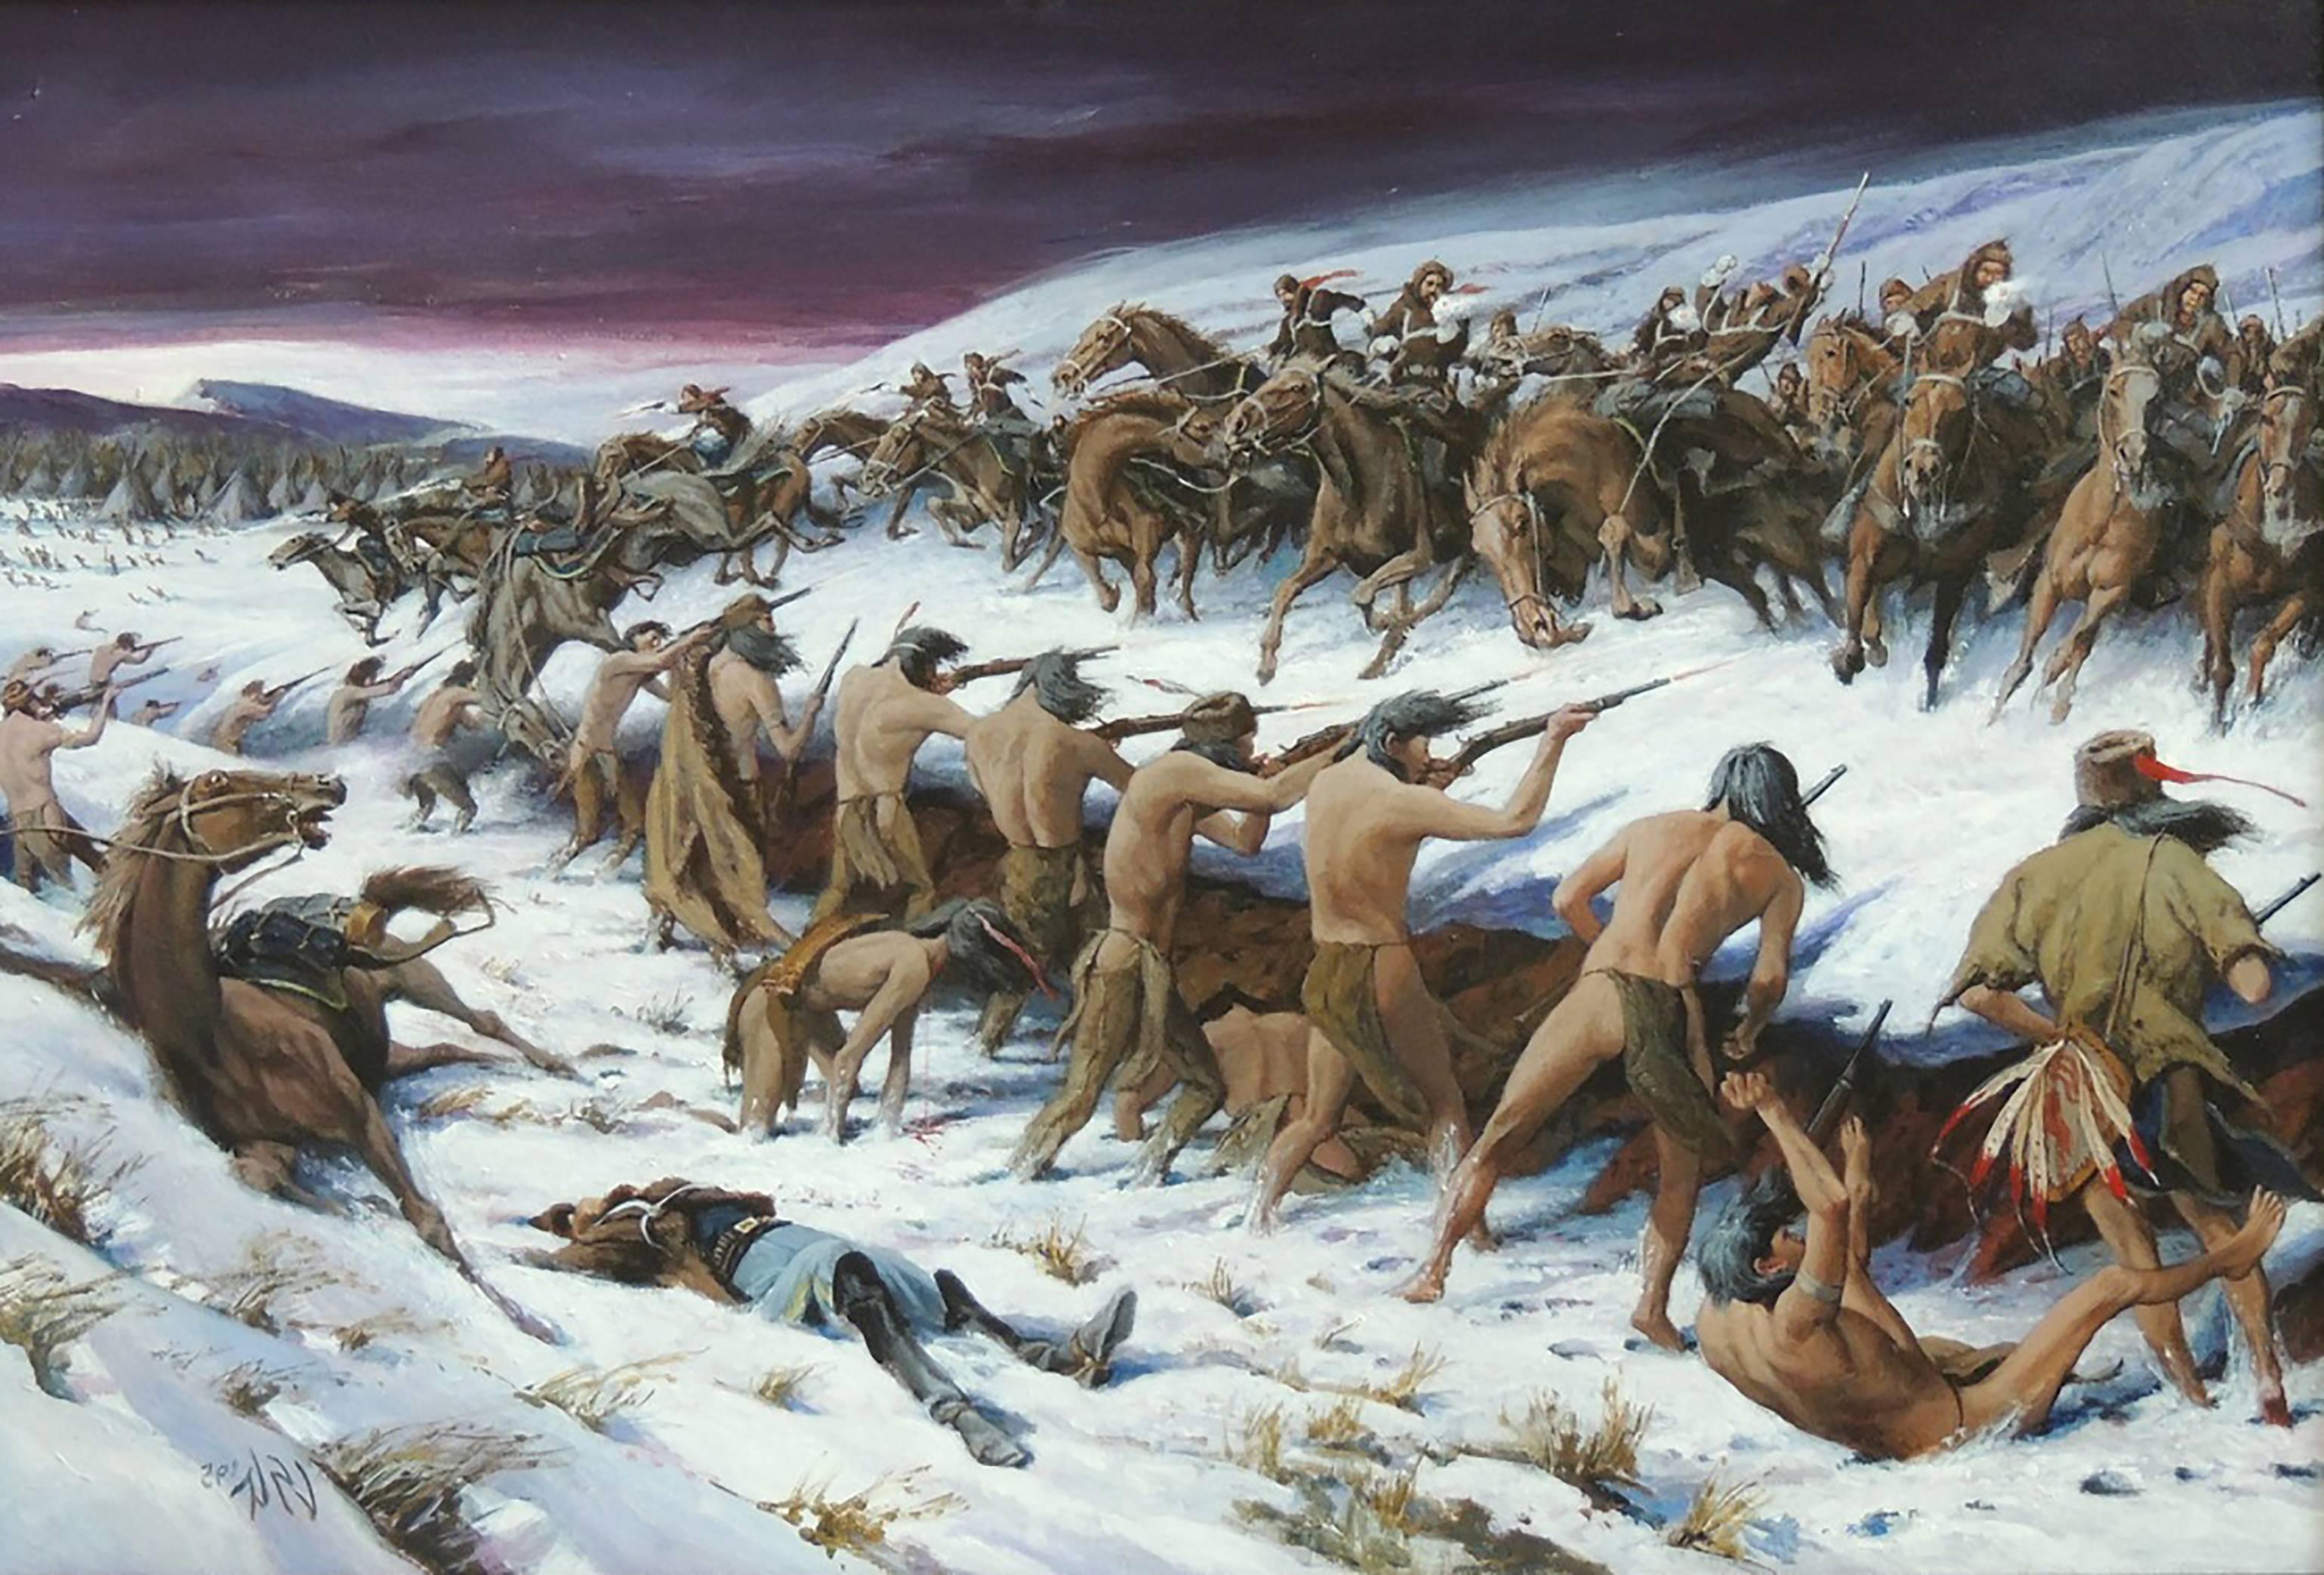 Louis S. Glanzman Figurative Painting - "A Cold Day in Hell" Book Cover